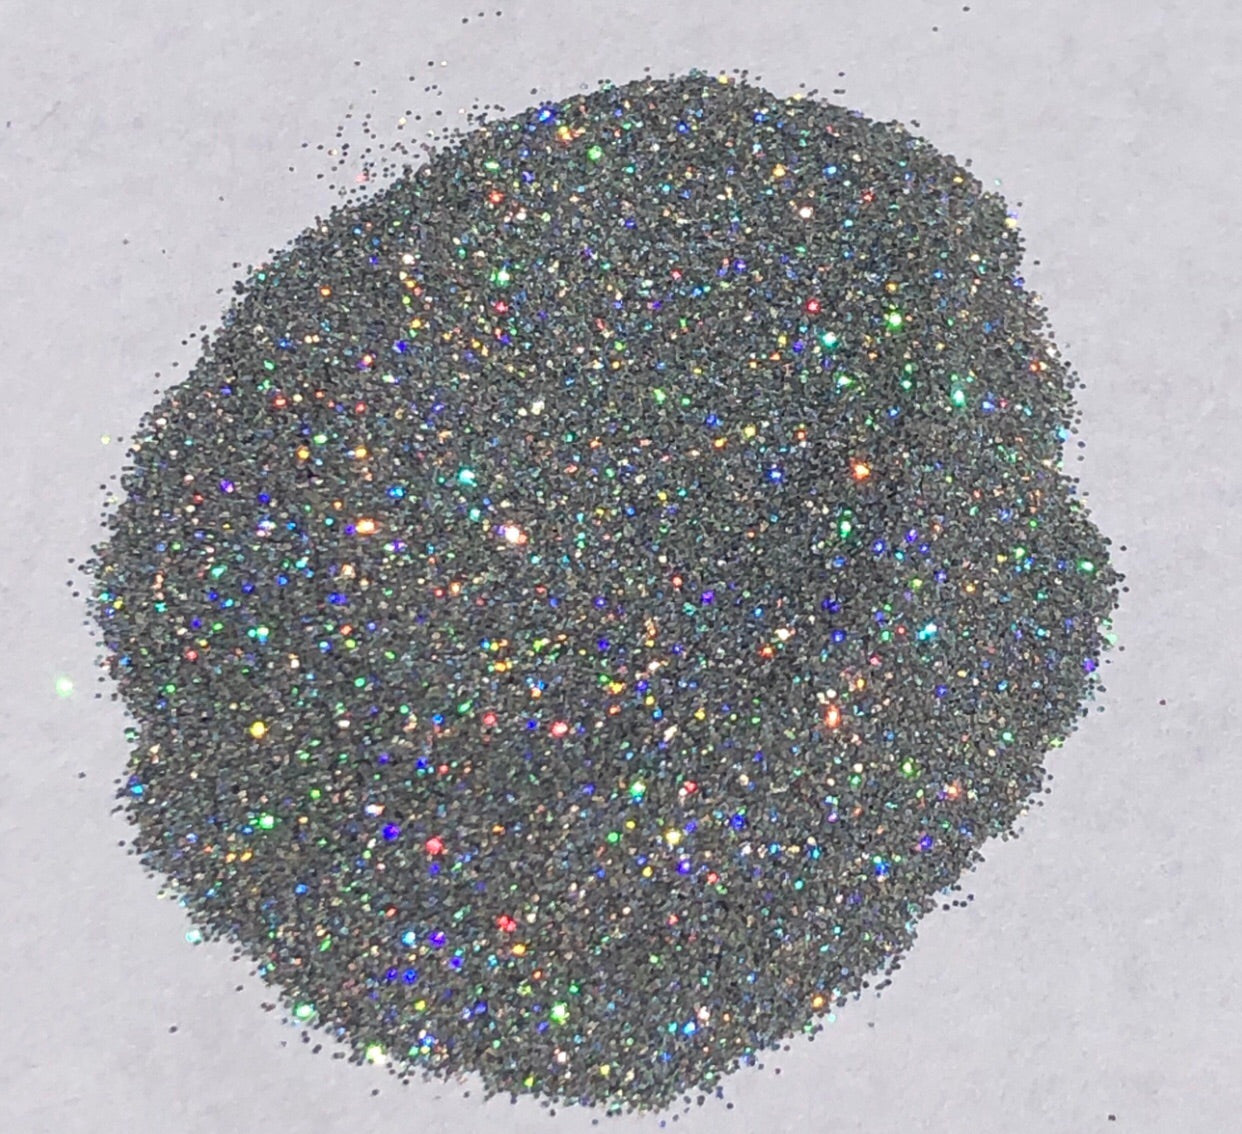 12 Packs: 12 Ct. (144 Total) Black Light Reactive Shaped Glitter by Creatology, Size: 0.84